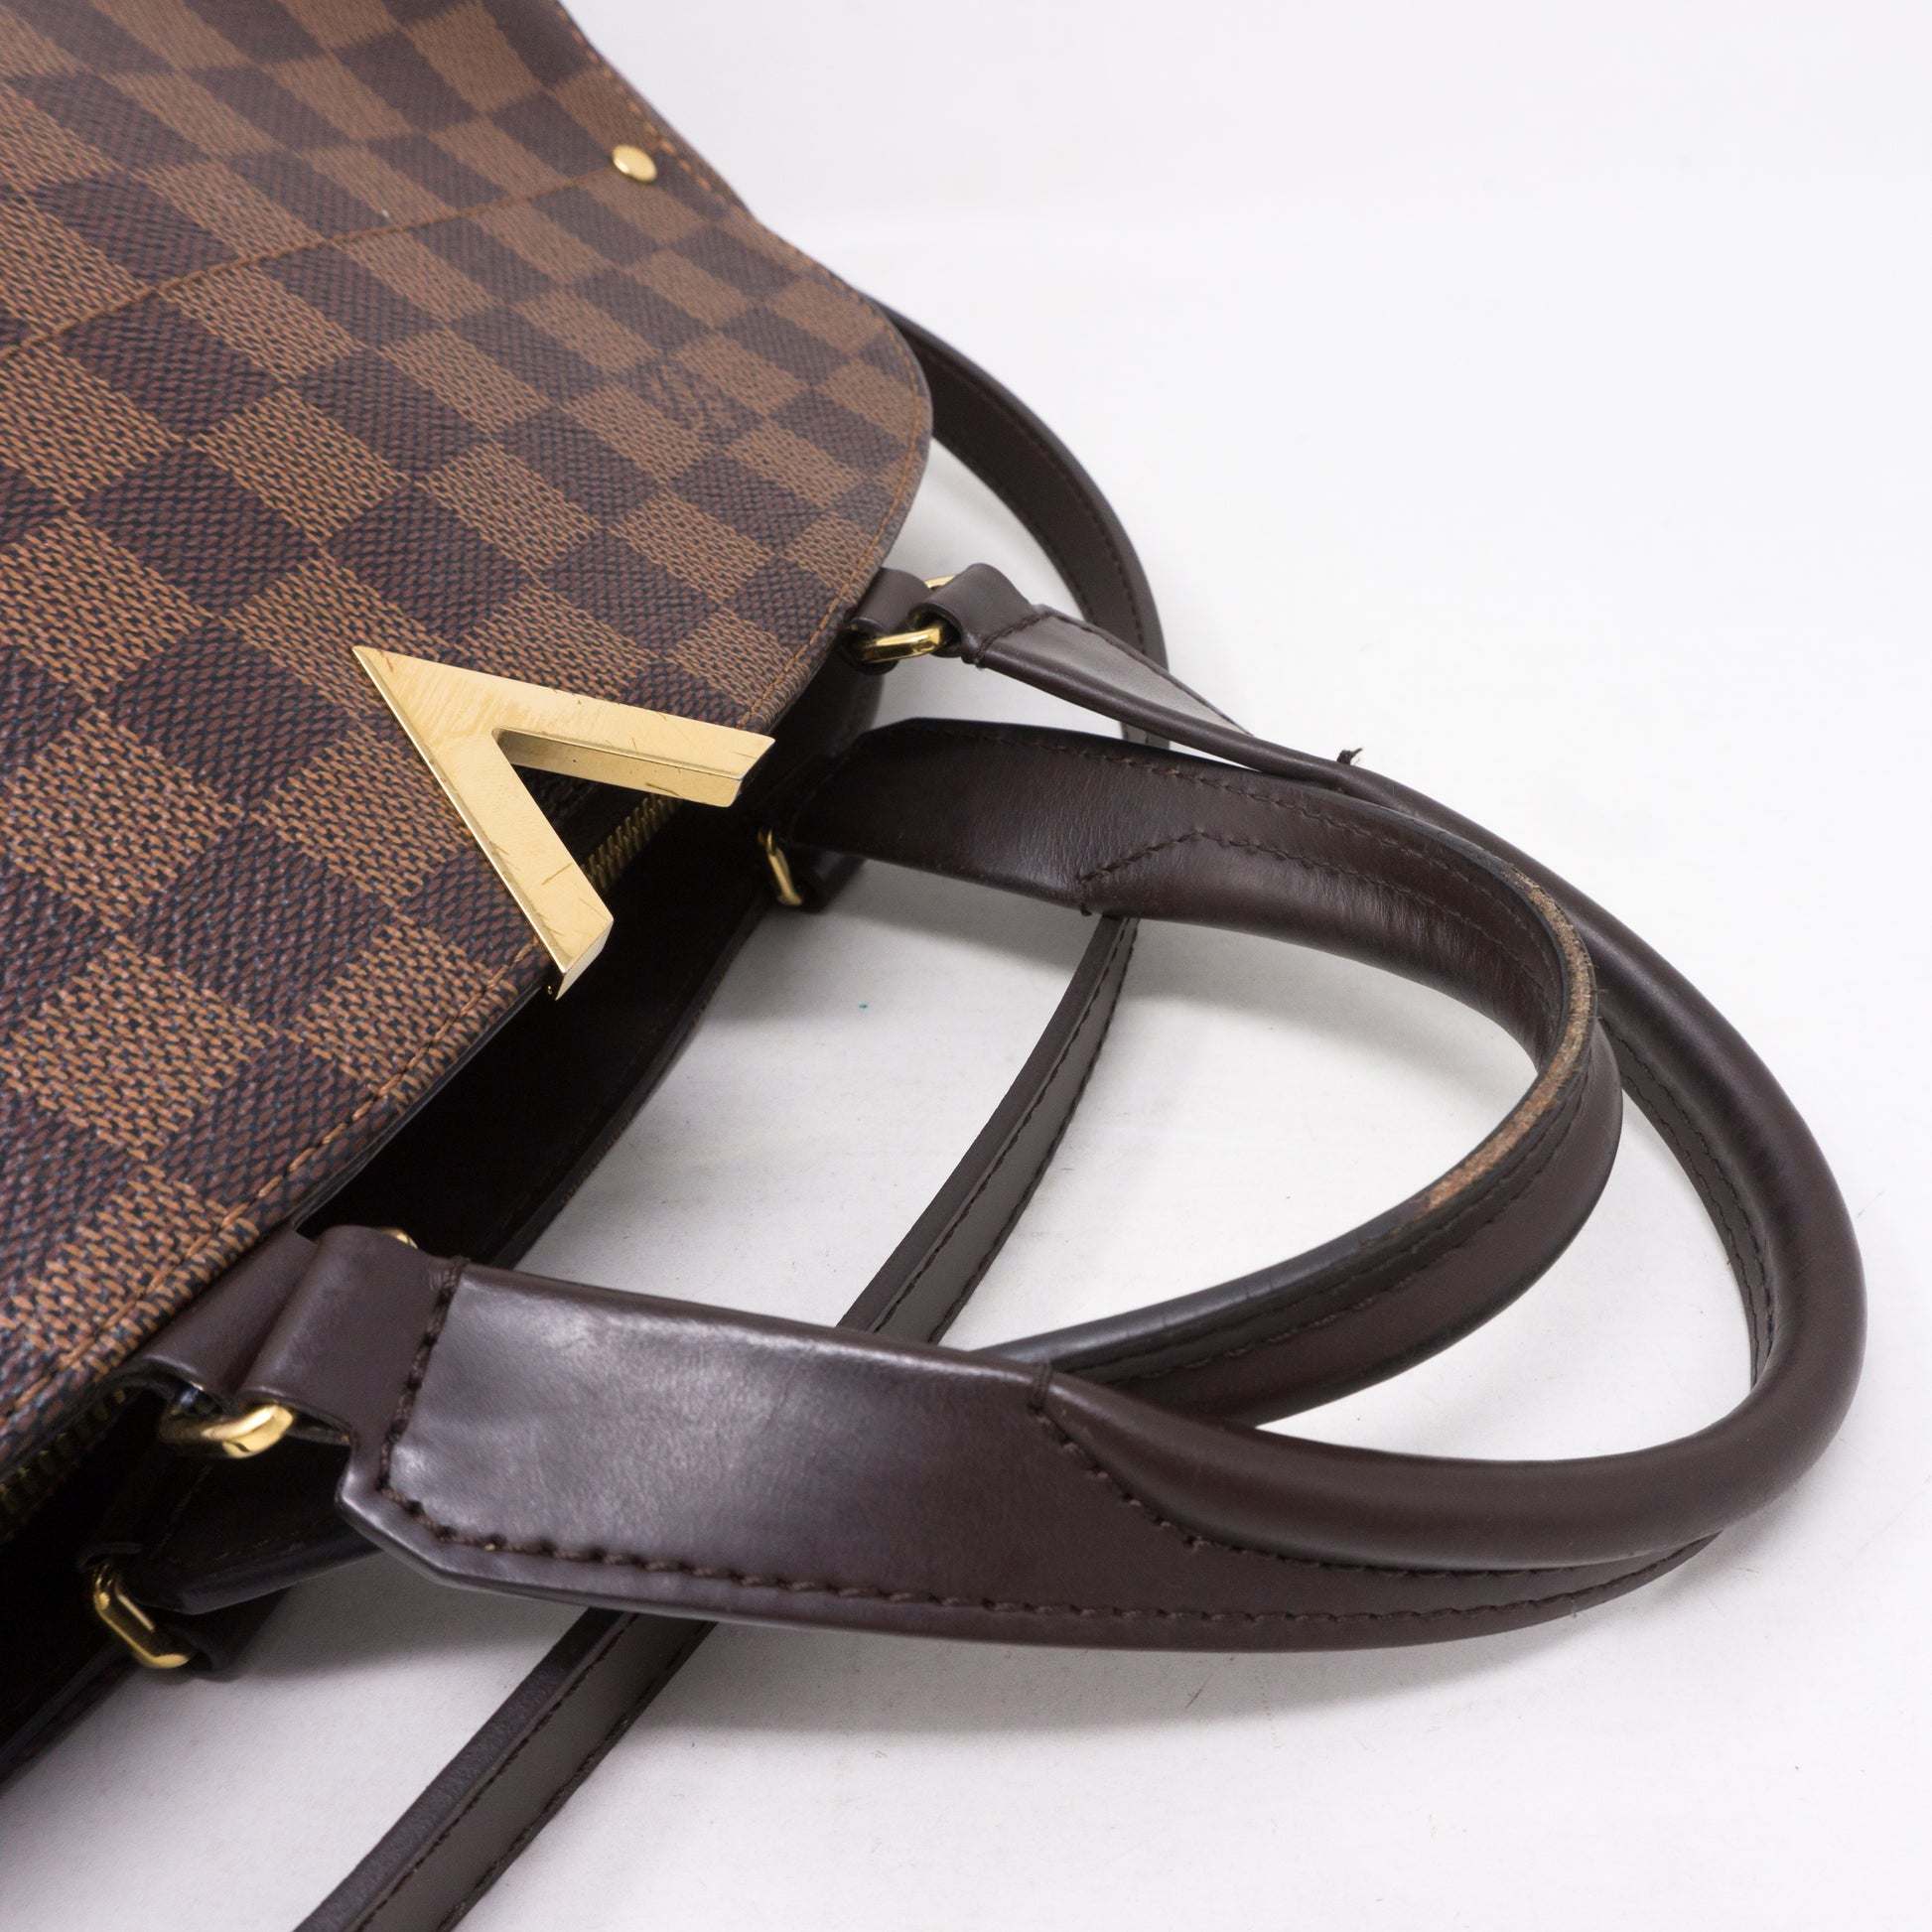 LV kensington bowling tote bag in damier canvas GHW Special price now